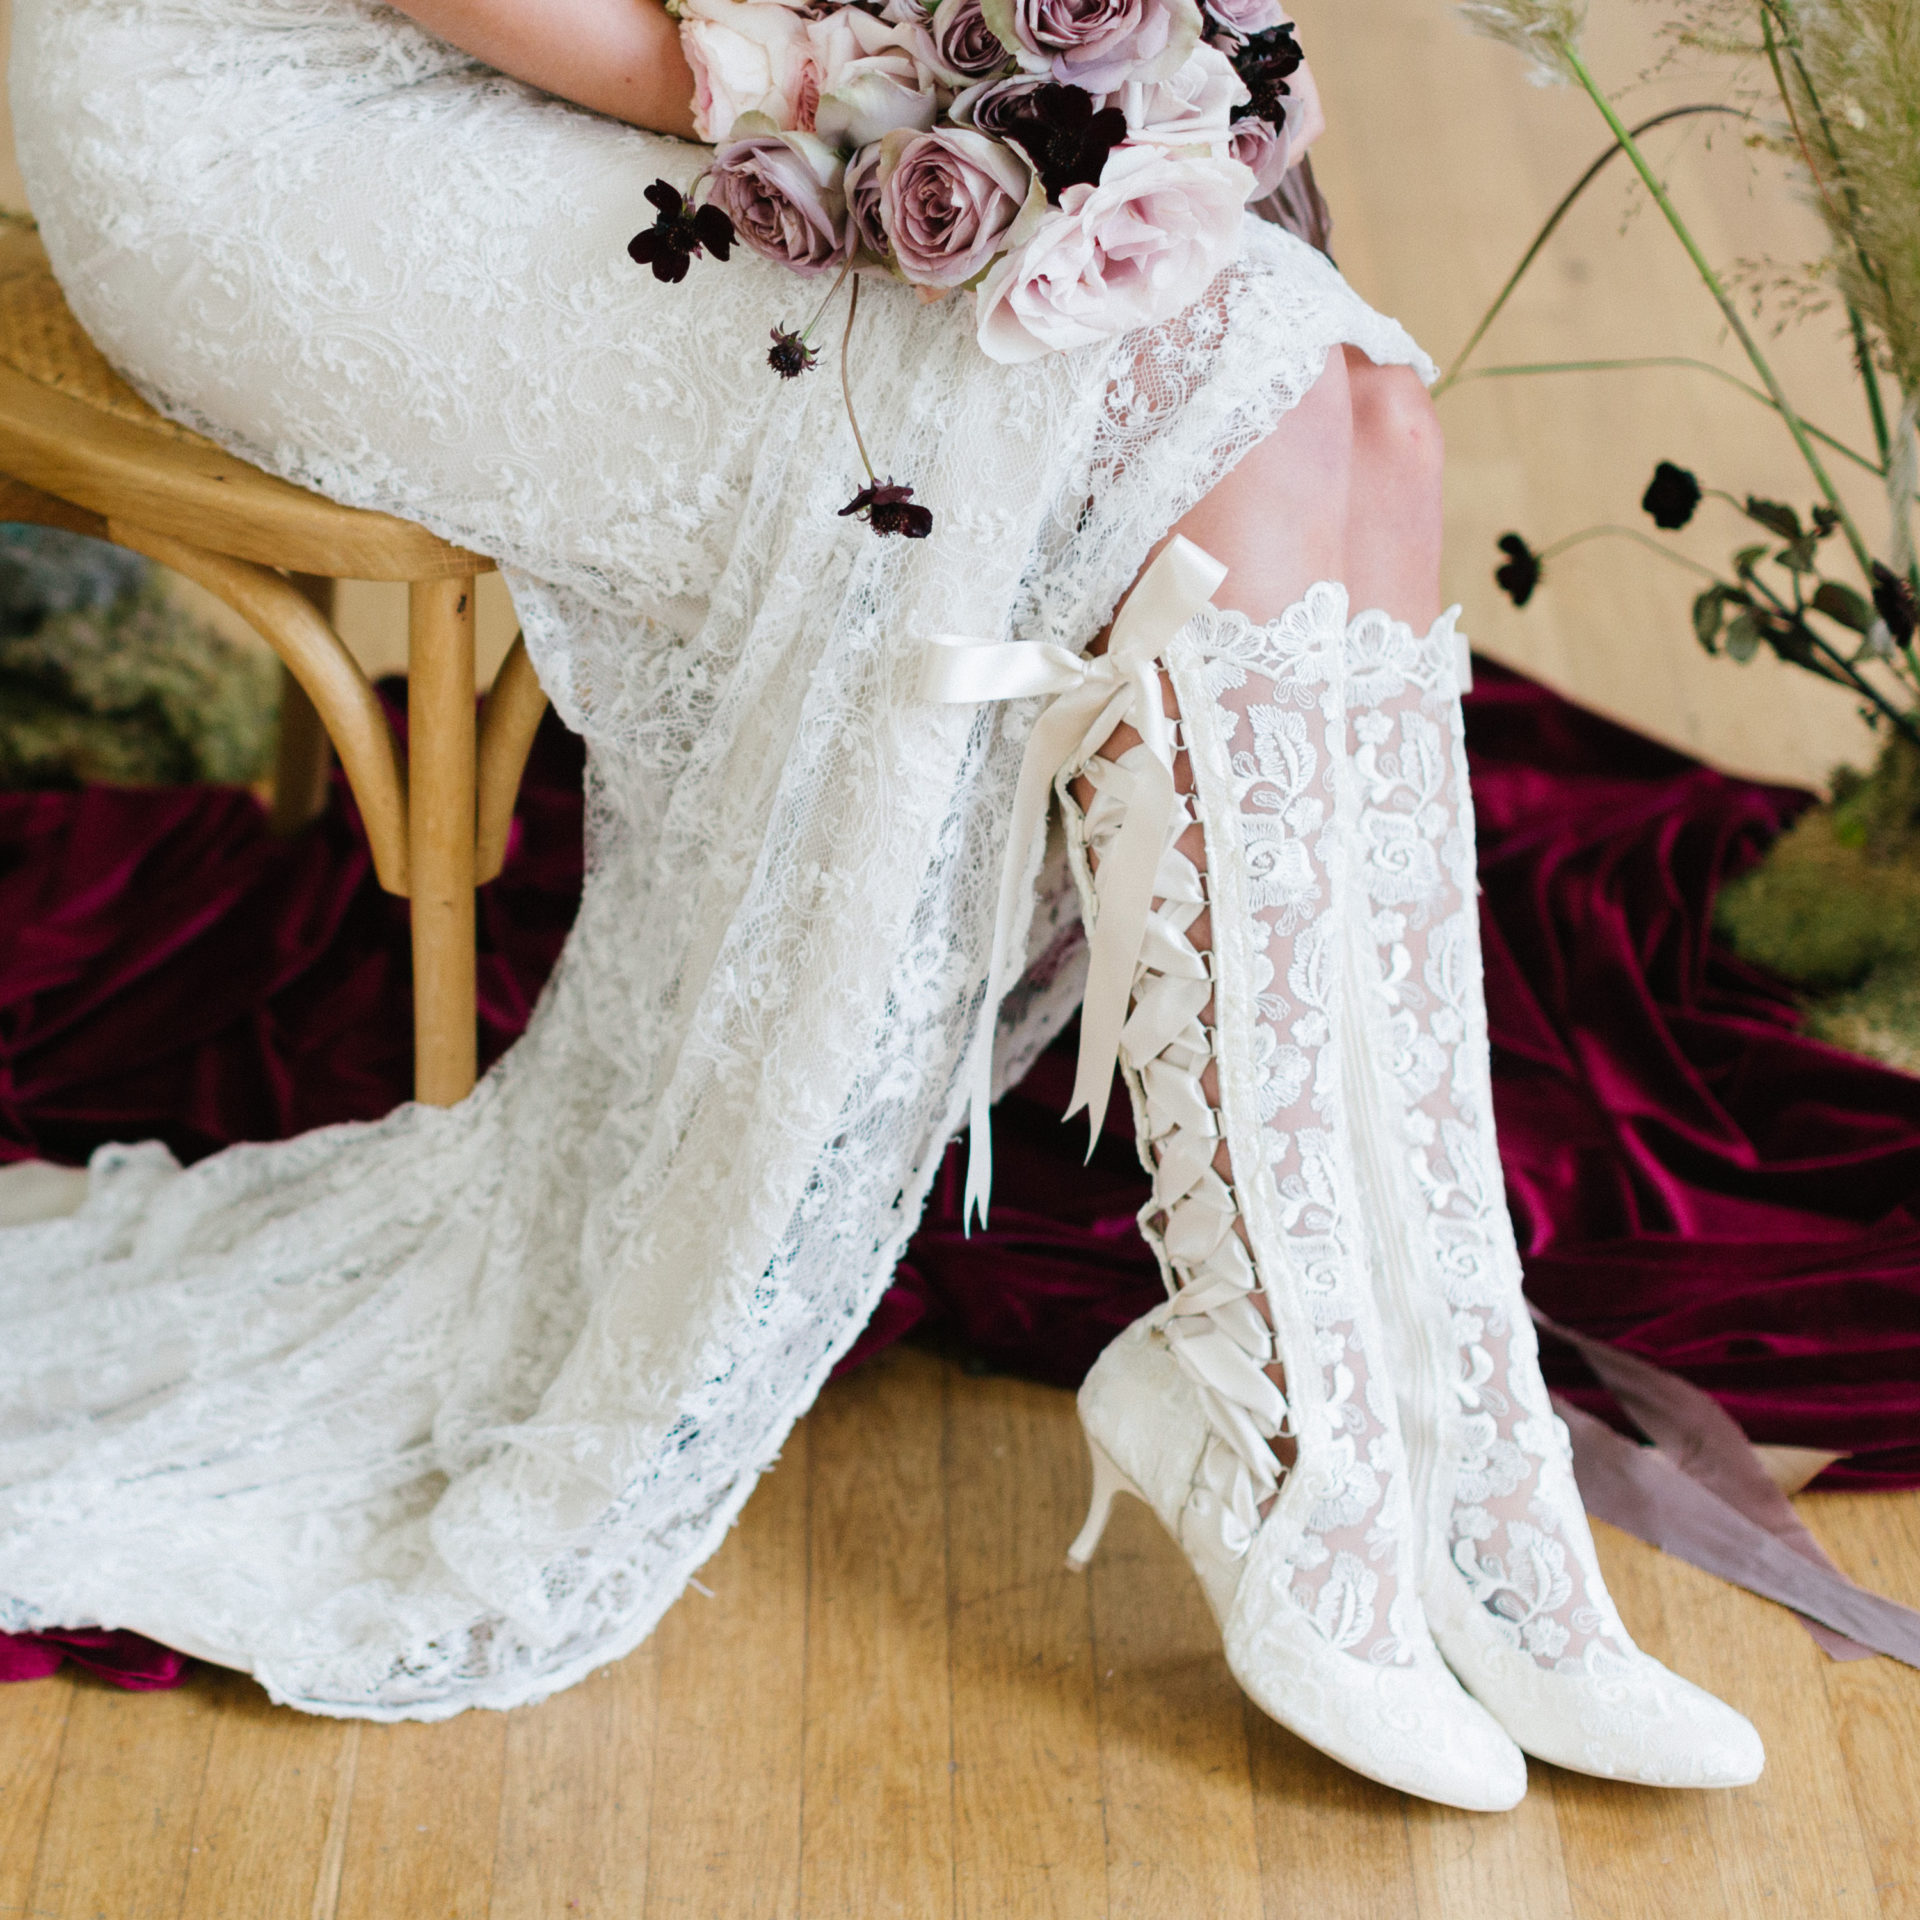 Vintage Wedding Boots and Shoes - House of Elliot